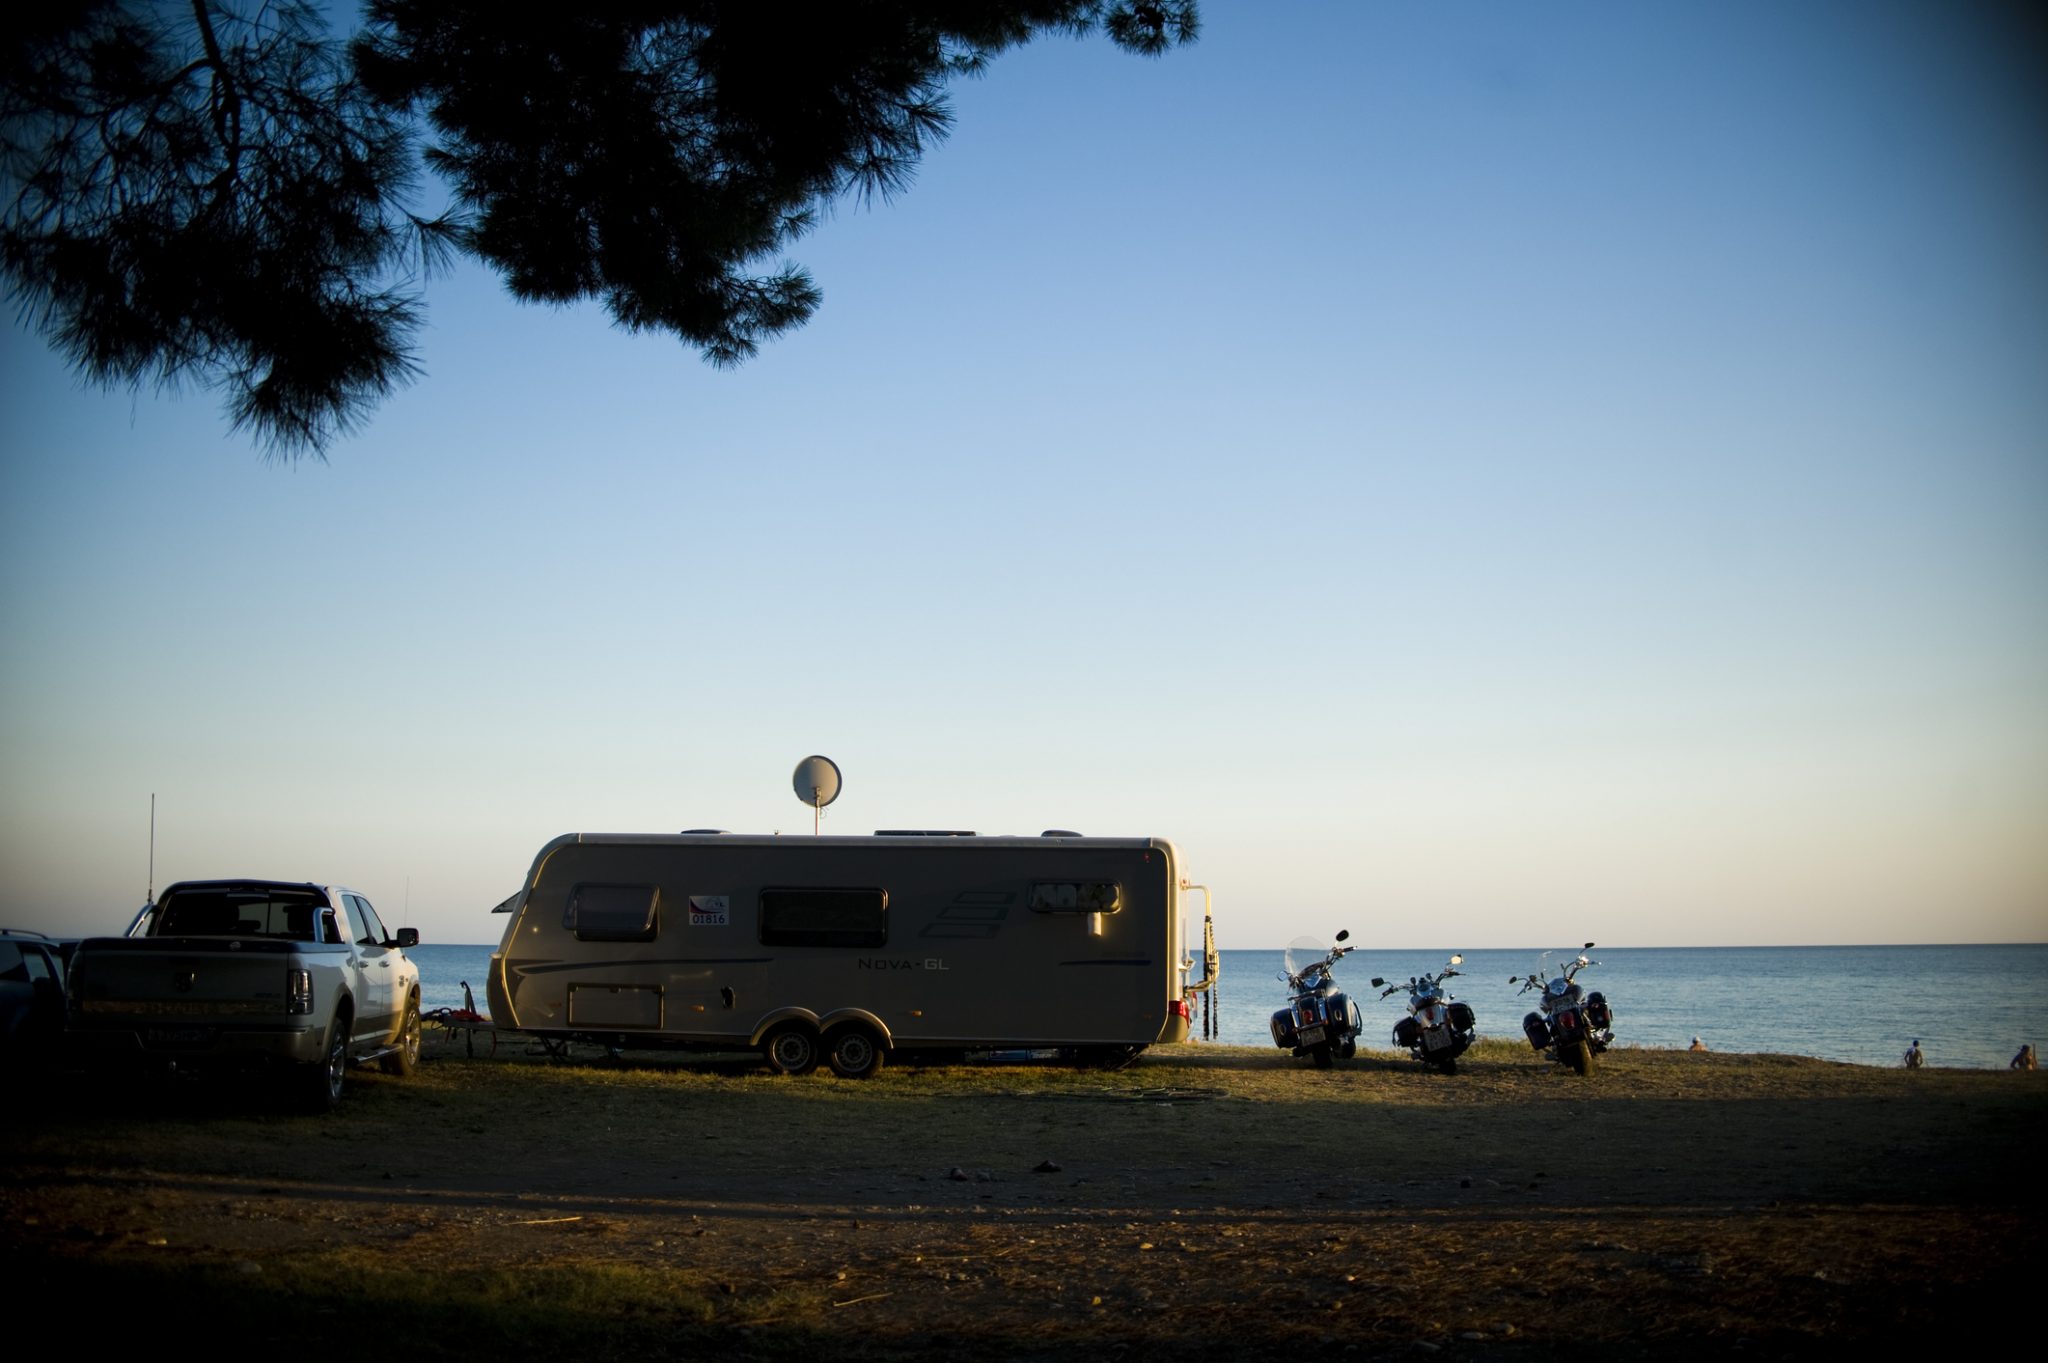 Three motorcycles parked next to motorhome along beach